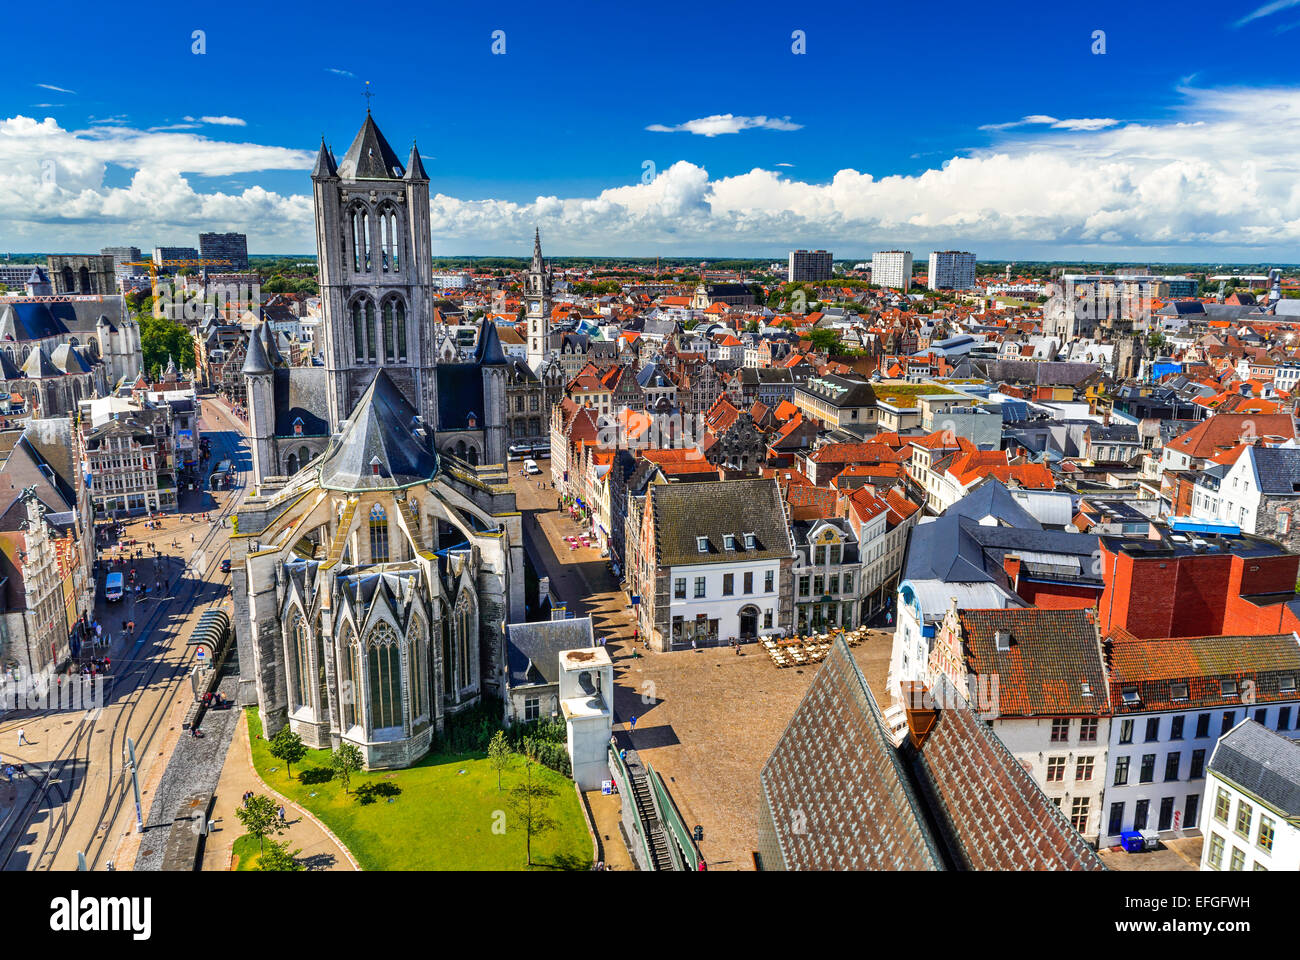 Skyline of Gent, Ghent in West Flanders, Belgium, seen from Belfort tower with St. Nicholas Church. Stock Photo